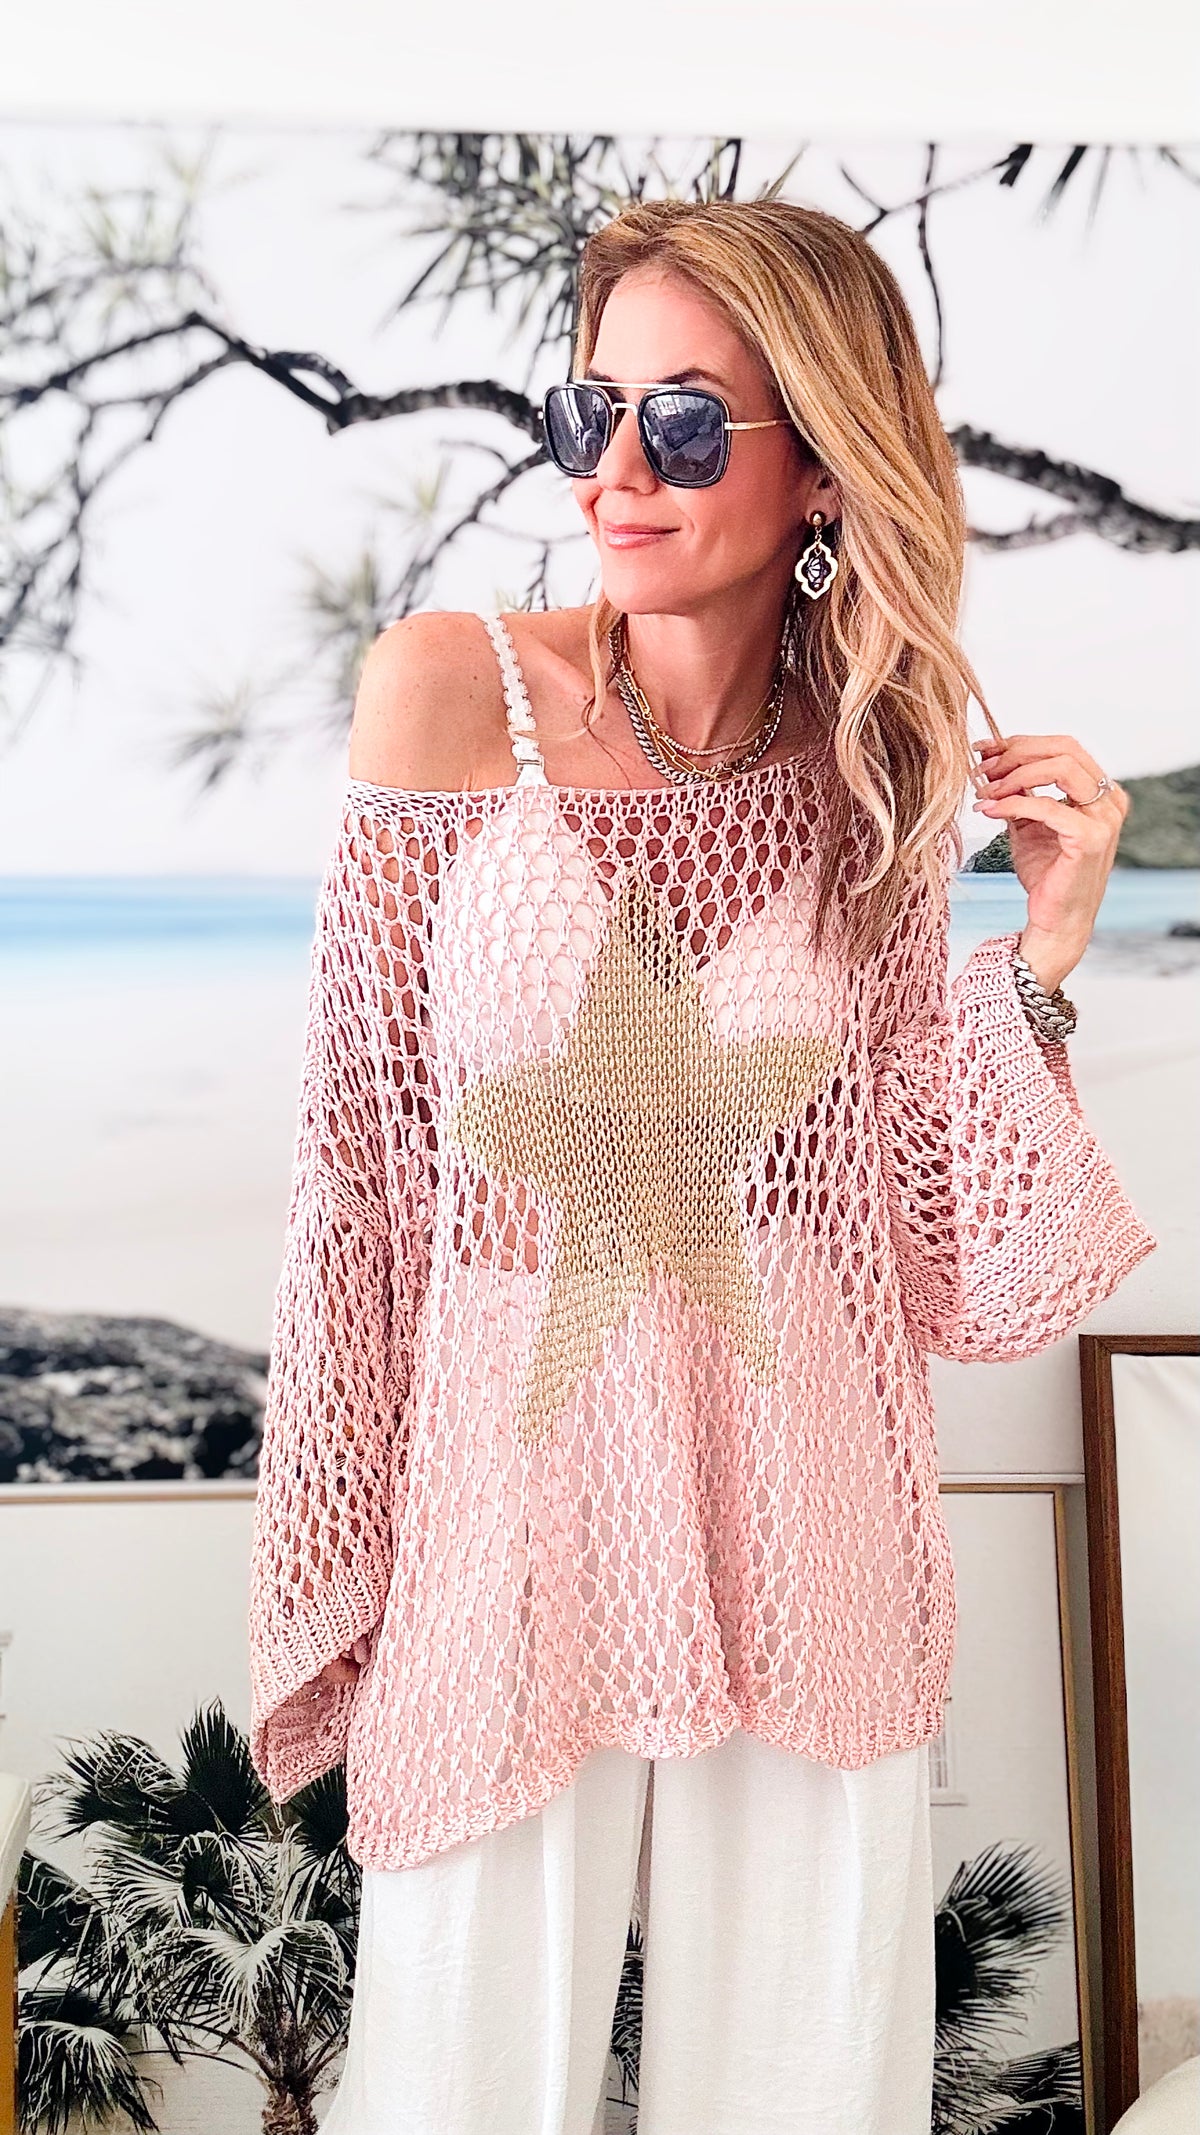 Shining Star Italian Chain Sweater - Blush /Gold-140 Sweaters-Italianissimo-Coastal Bloom Boutique, find the trendiest versions of the popular styles and looks Located in Indialantic, FL